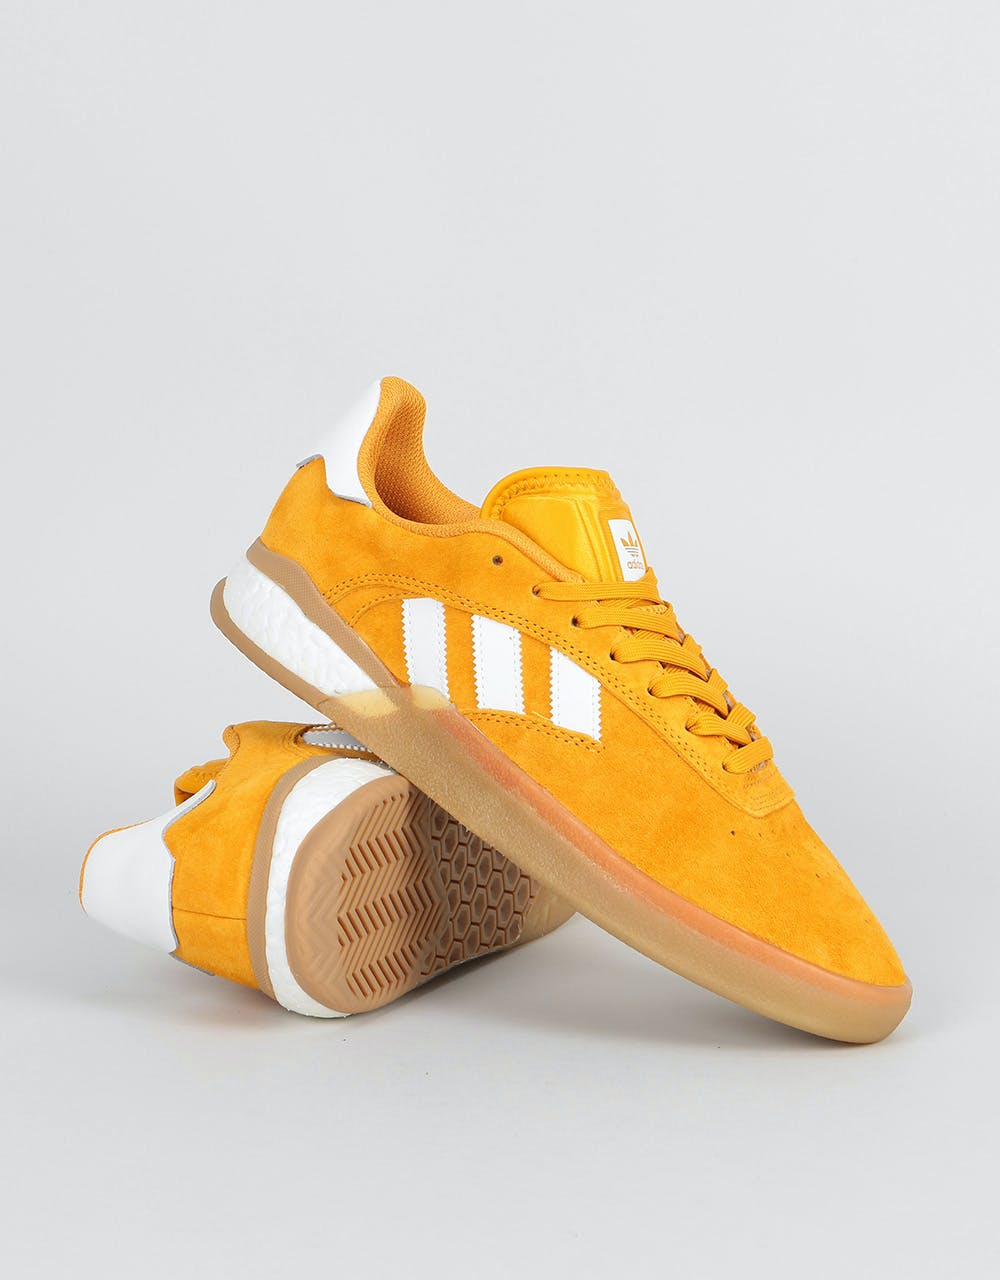 Adidas 3ST.004 Skate Shoes - Tactile Yellow/White/Gum